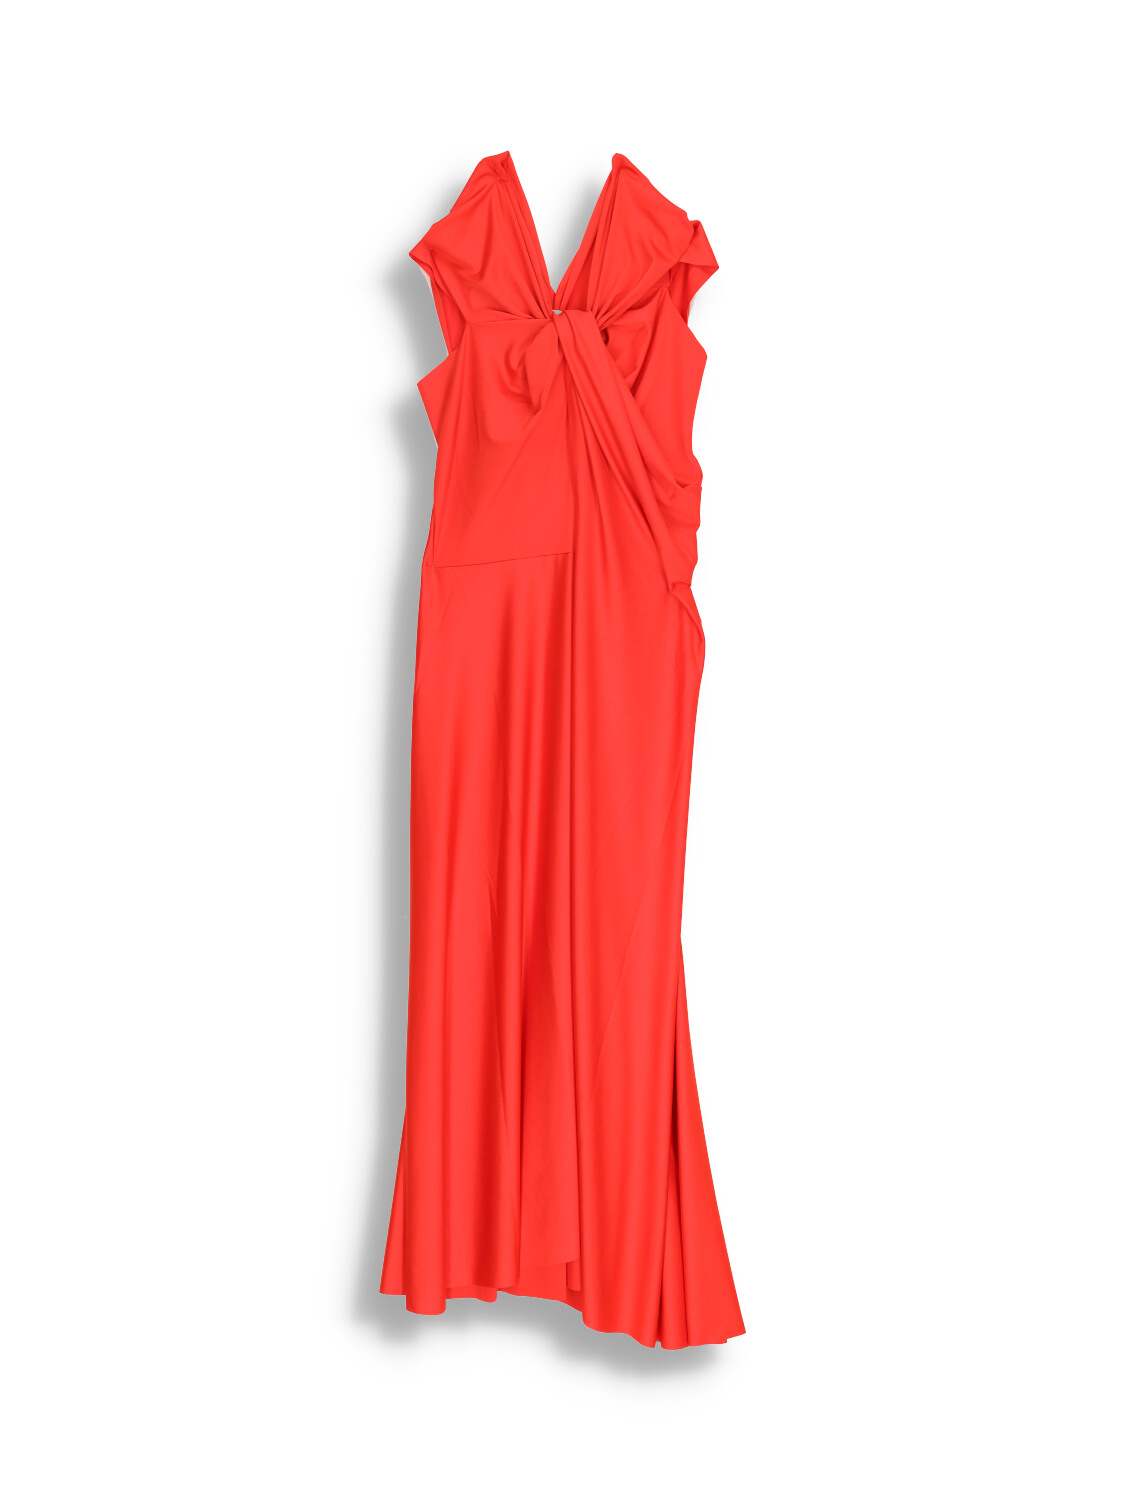 Sleeveless midi dress with knotted neckline detail